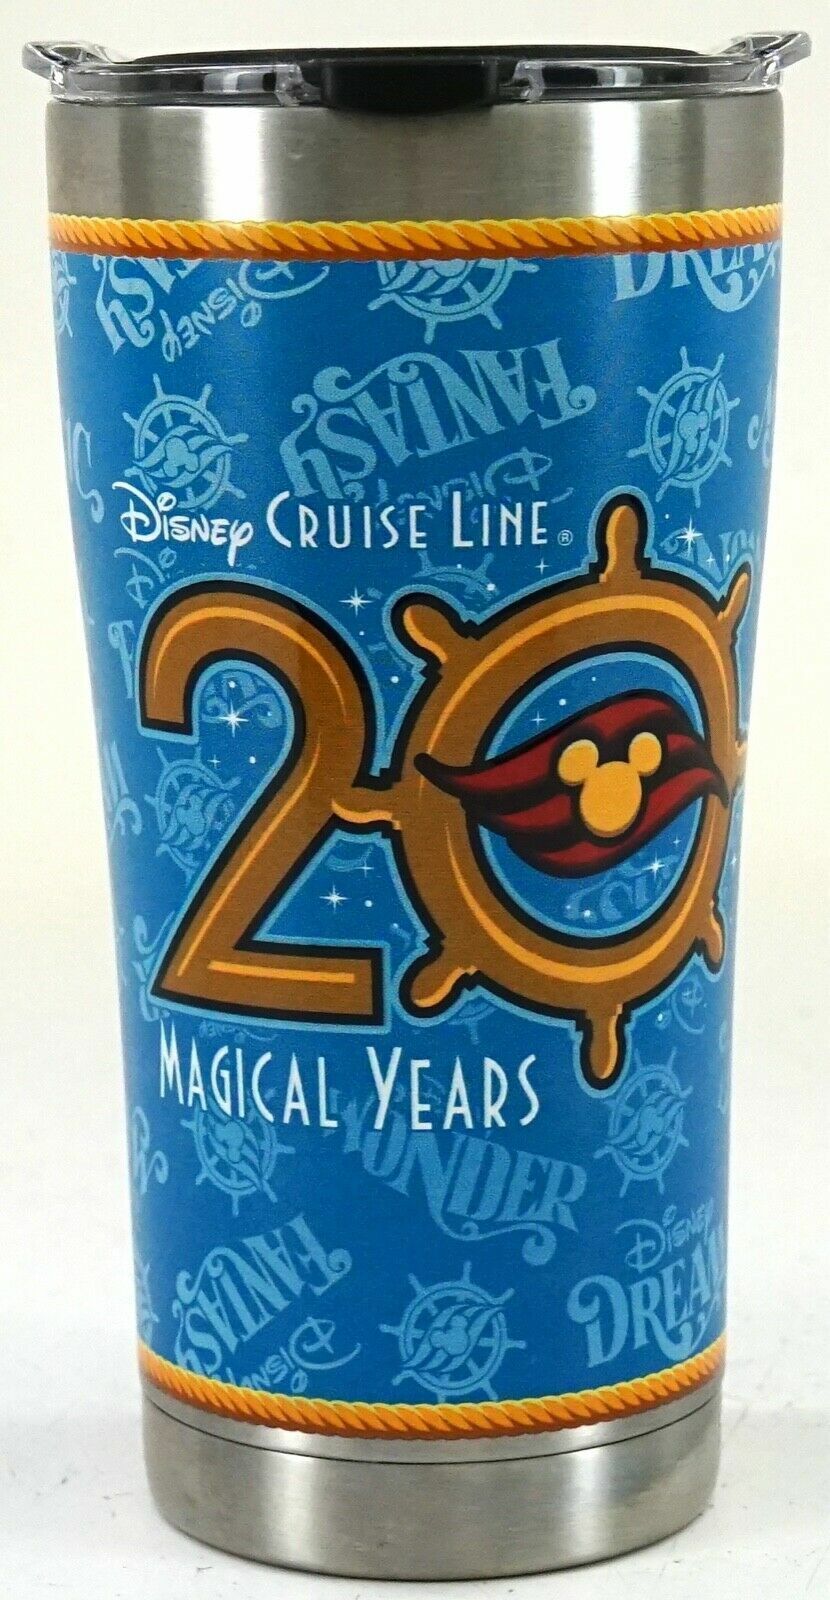 Tervis Disney Cruise Line 20th Anniversary 20oz Stainless Steel Tumbler 